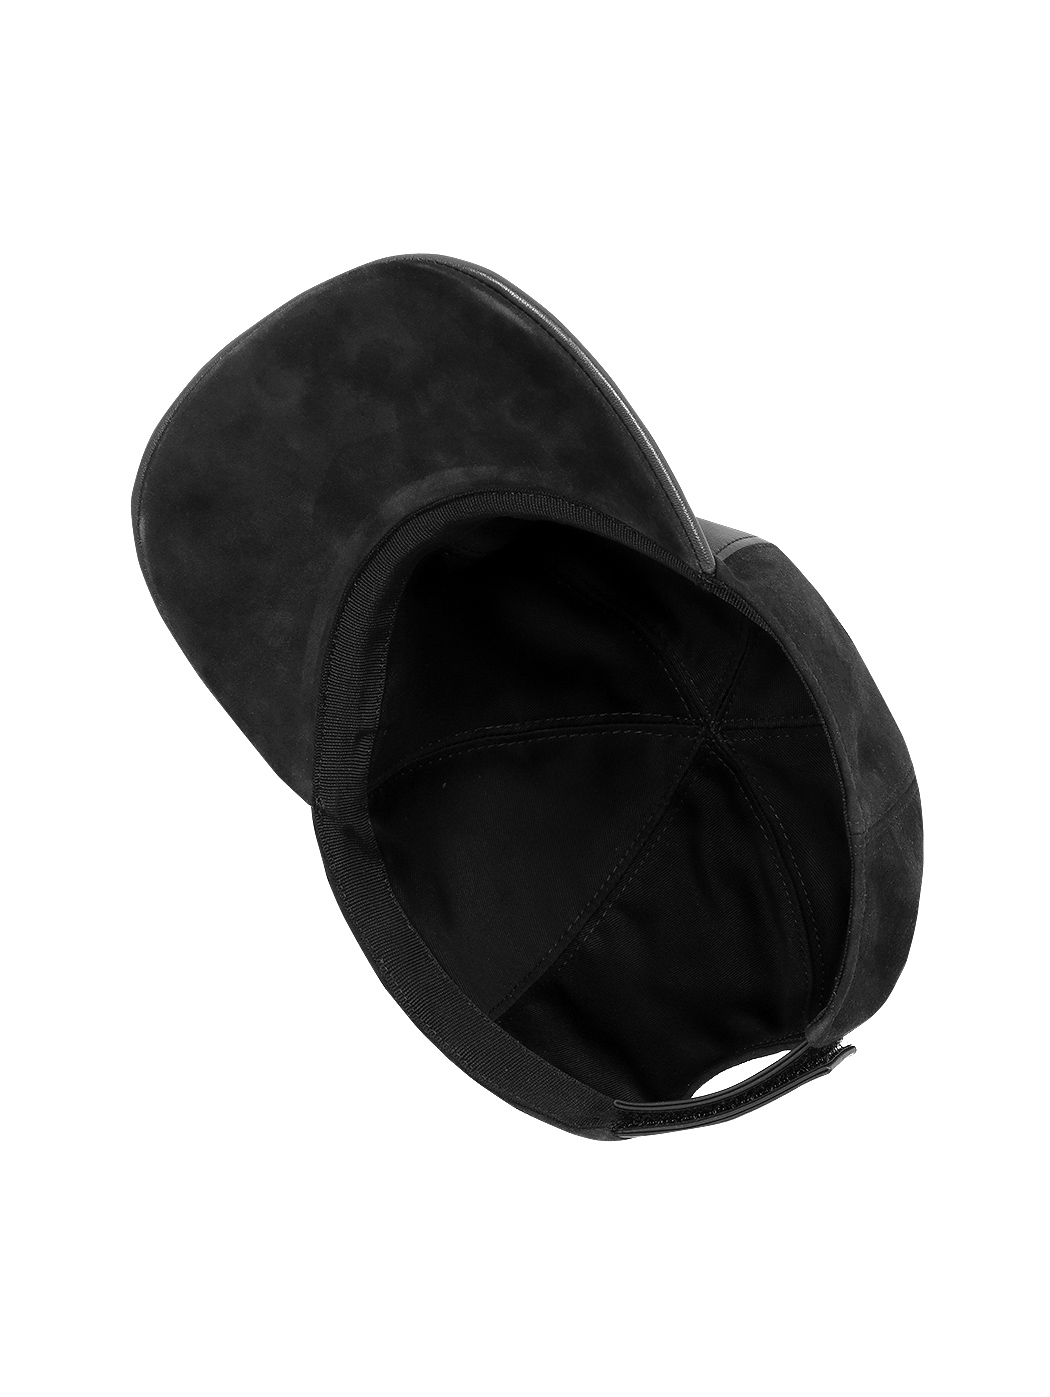 Black Baseball hat in leather and suede